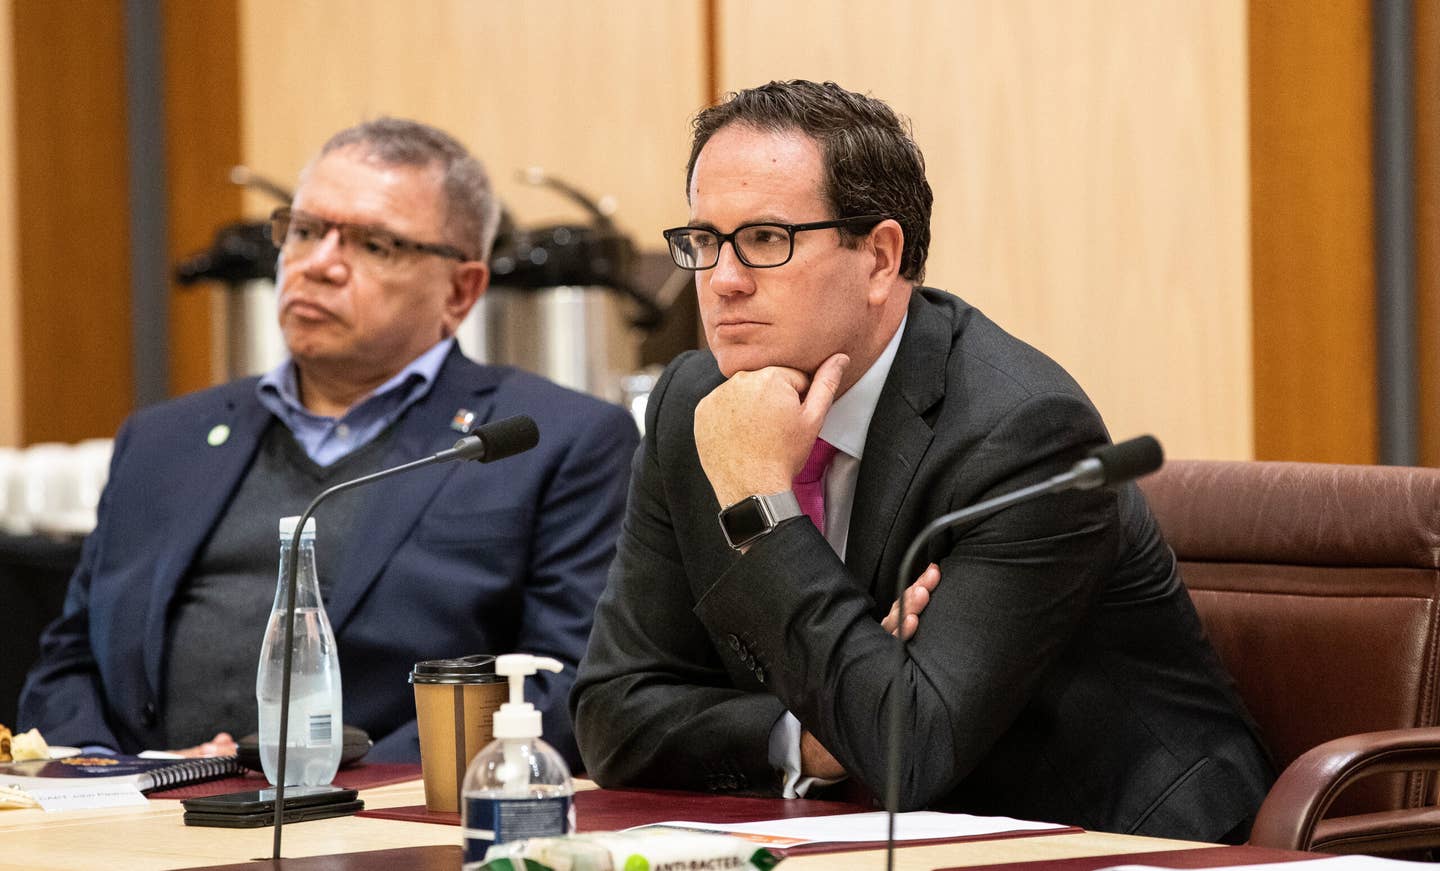 Minister for Veterans Affairs and Minister for Defence Personnel, the Matt Keogh at the Defence Strategic Review Indigenous Roundtable in Canberra, in October 2022. <em>Australian Department of Defense</em>